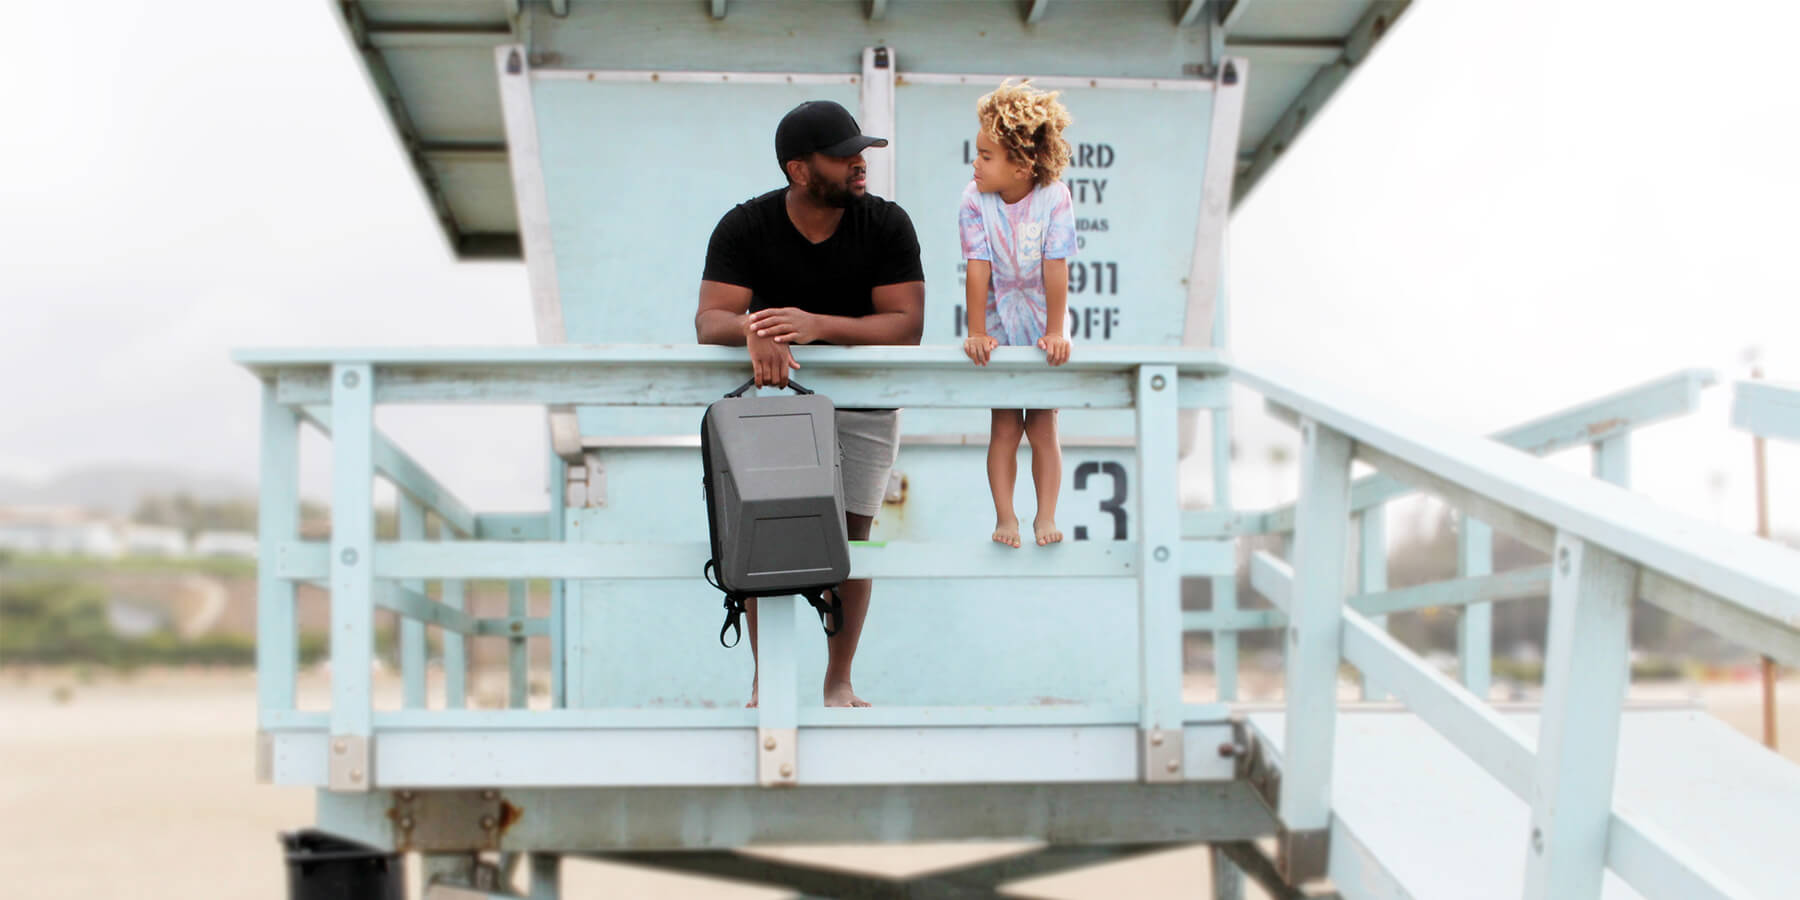 Riz and son on a lifeguard tower in malibu while holding a cyber backpack.